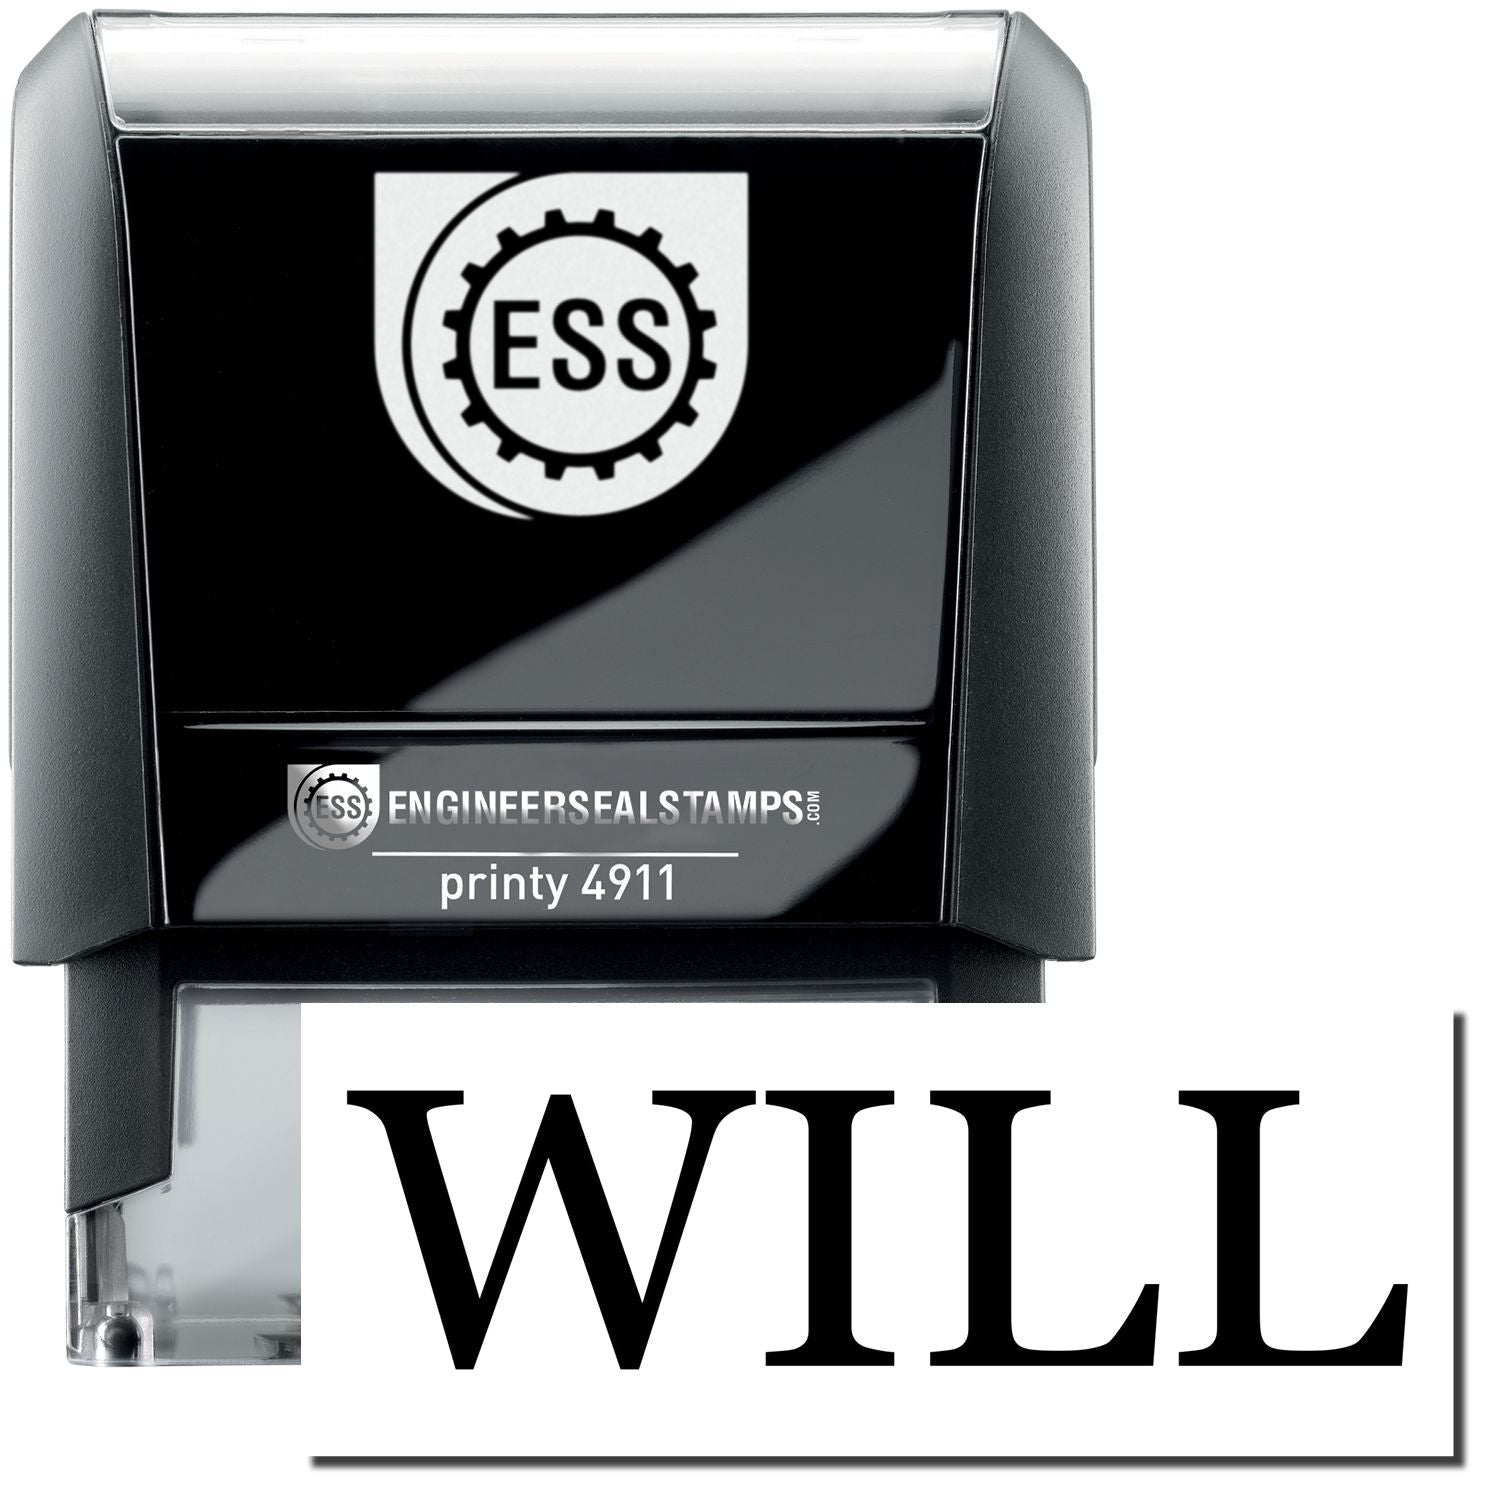 A self-inking stamp with a stamped image showing how the text "WILL" is displayed after stamping.